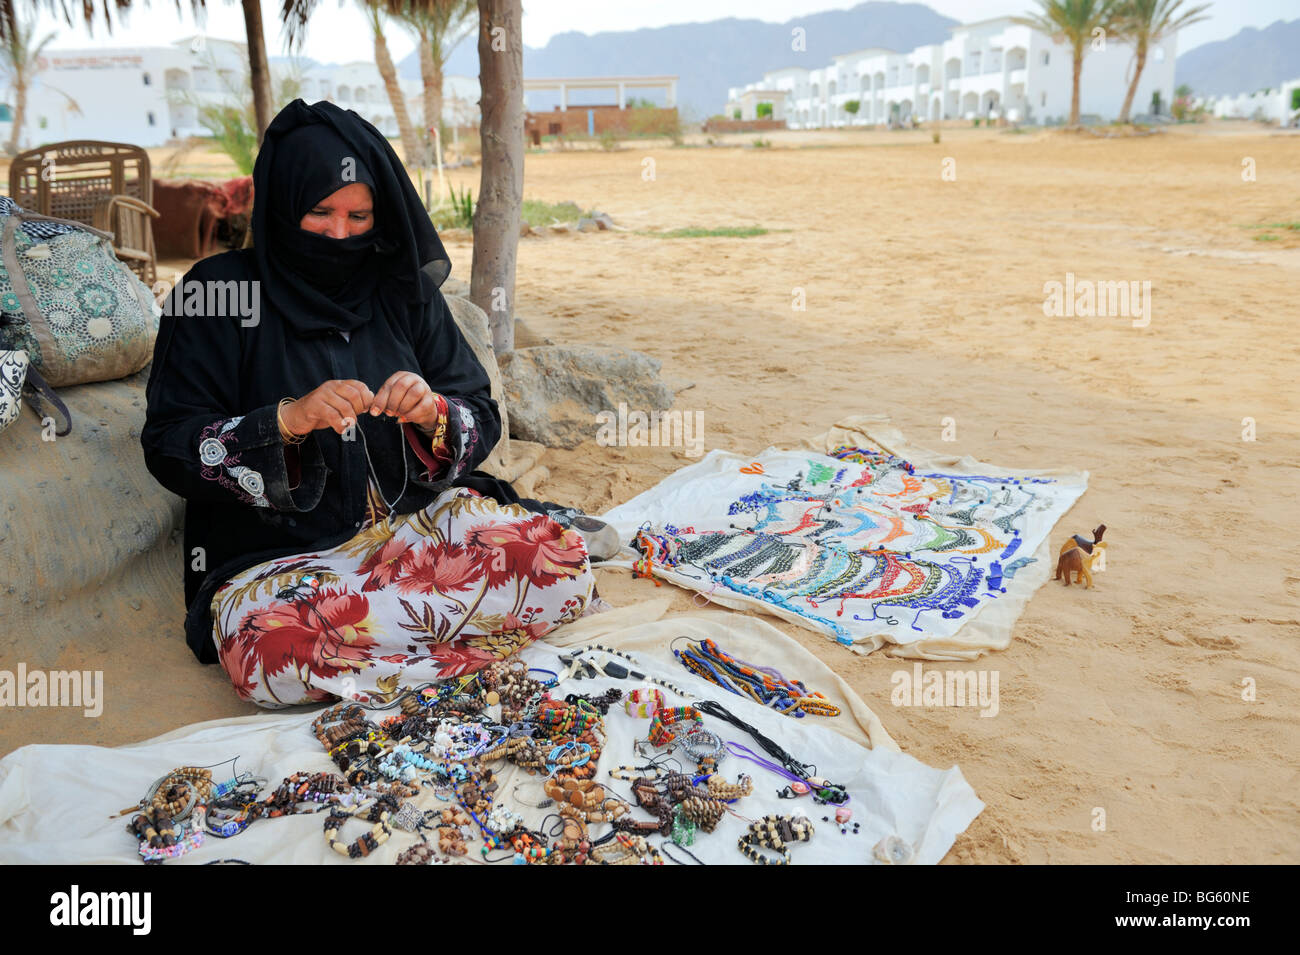 Bedouin woman sitting on traditional carpet selling trinkets and jewellery, Nuweiba beach, Sinai, Egypt Stock Photo